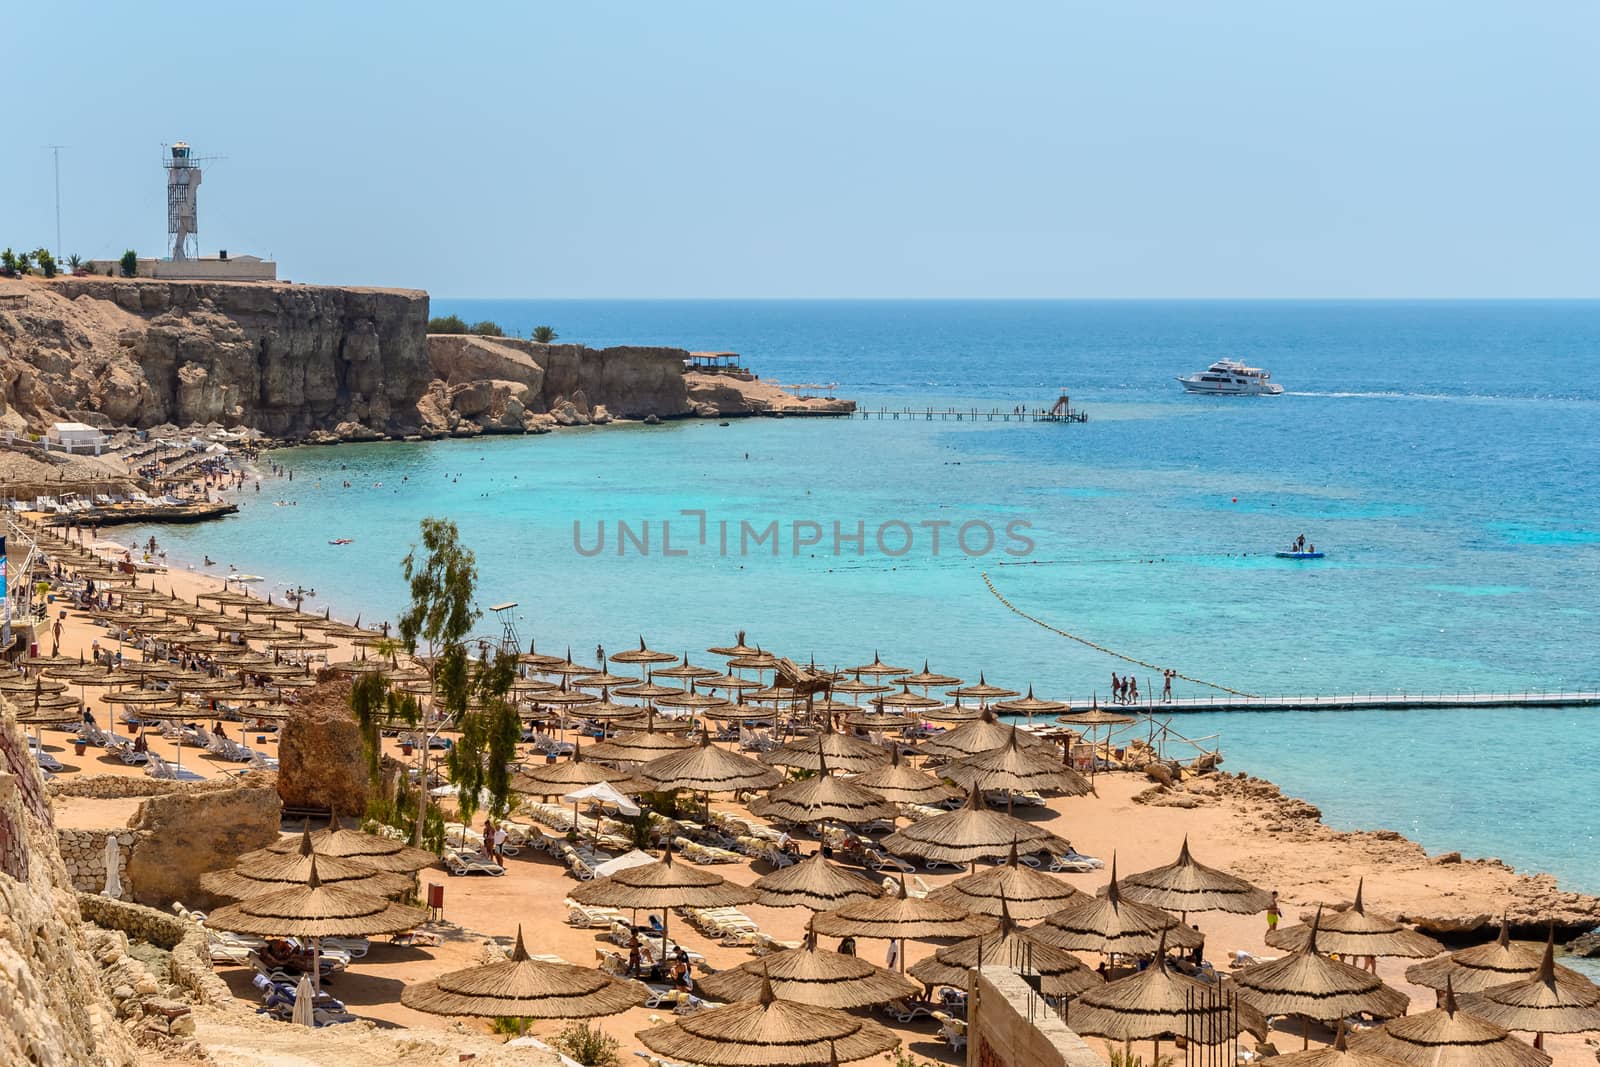 In the picture a typical Egyptian beach in the Red Sea with wood and straw umbrellas and turquoise sea.